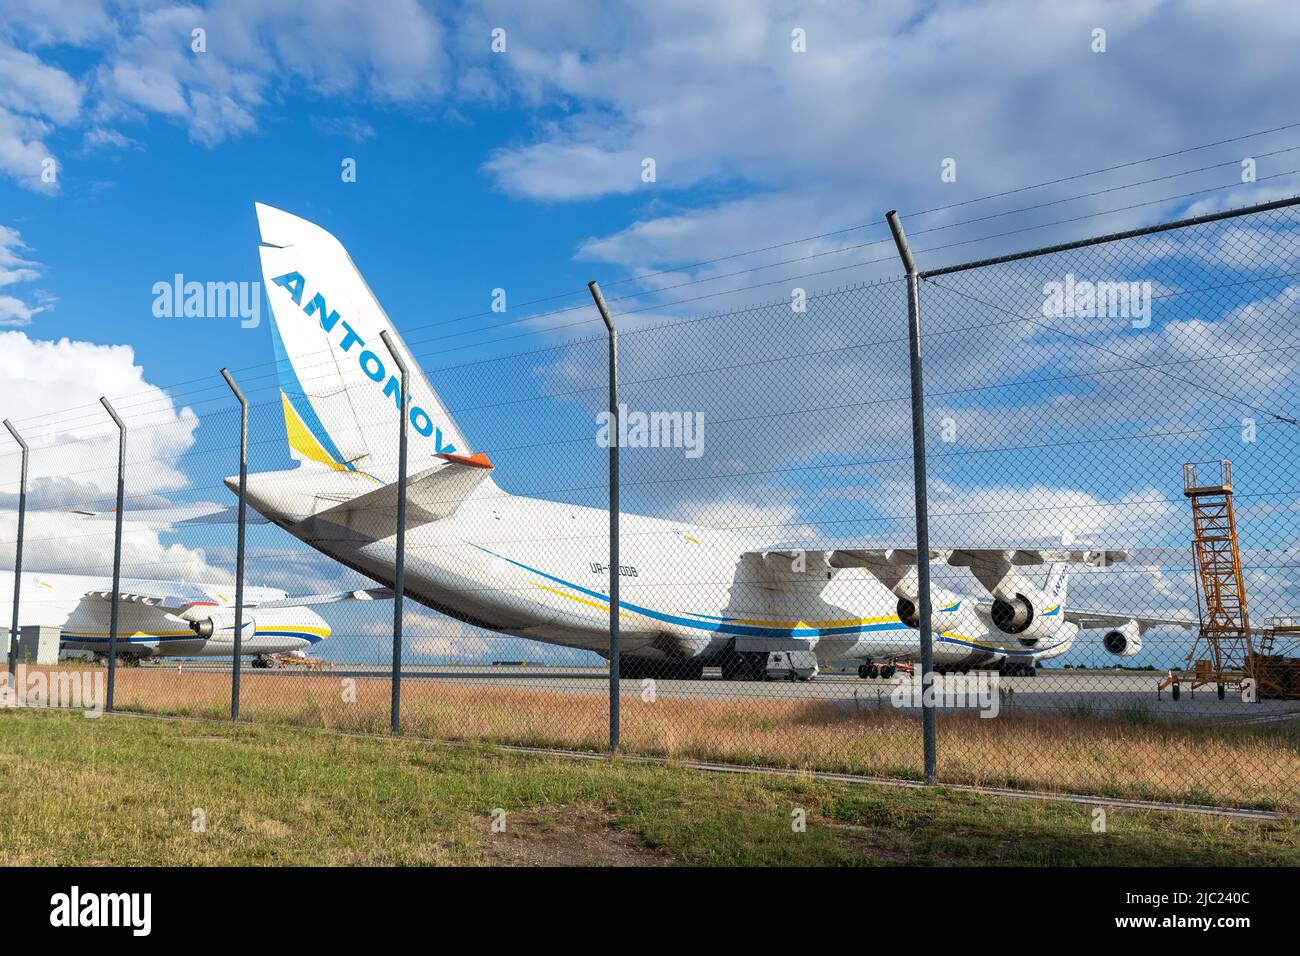 Schkeuditz, Germany - 29th May, 2022 - Many big An-124-100 ukrainian Ruslan cargo jets parked on Leipzig Halle airport terminal tarmac apron for Stock Photo